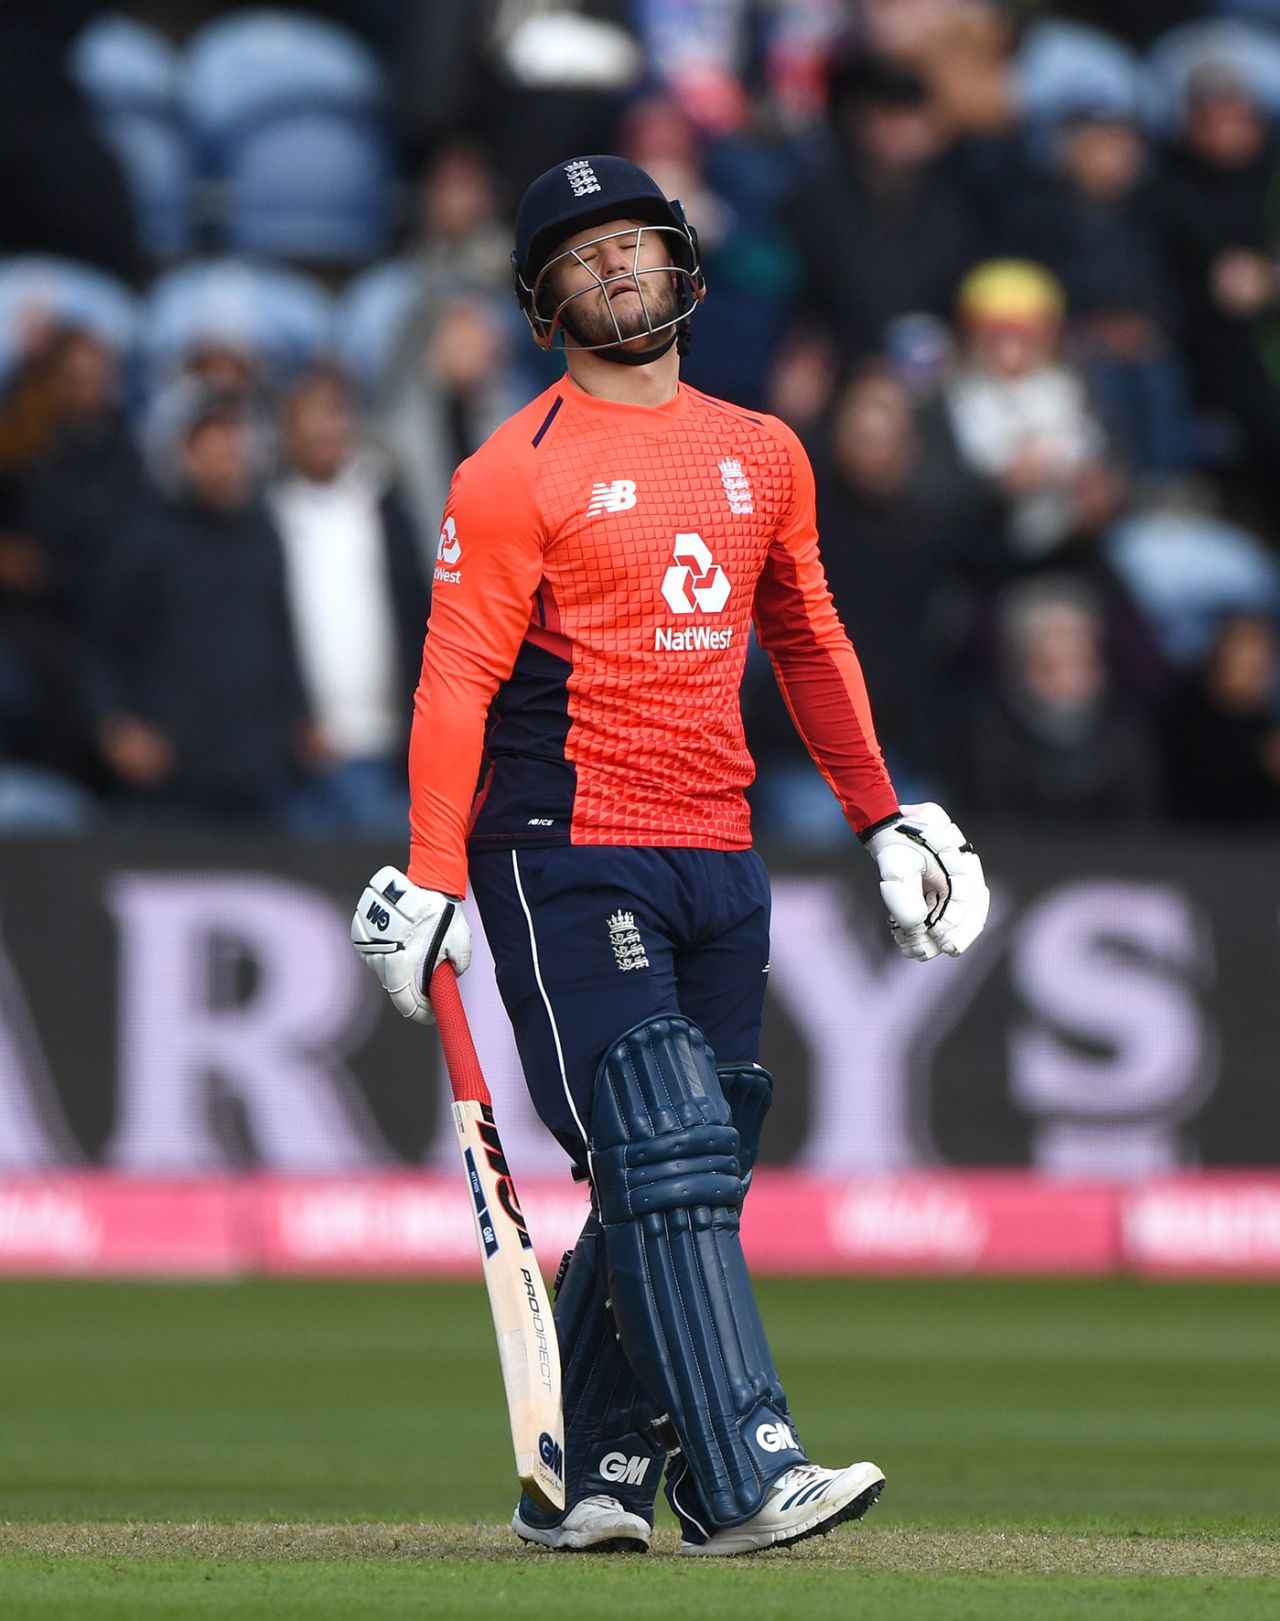 Ben Duckett grimaces after being given out on his T20I debut, England v Pakistan, only T20I, Cardiff, May 5, 2019